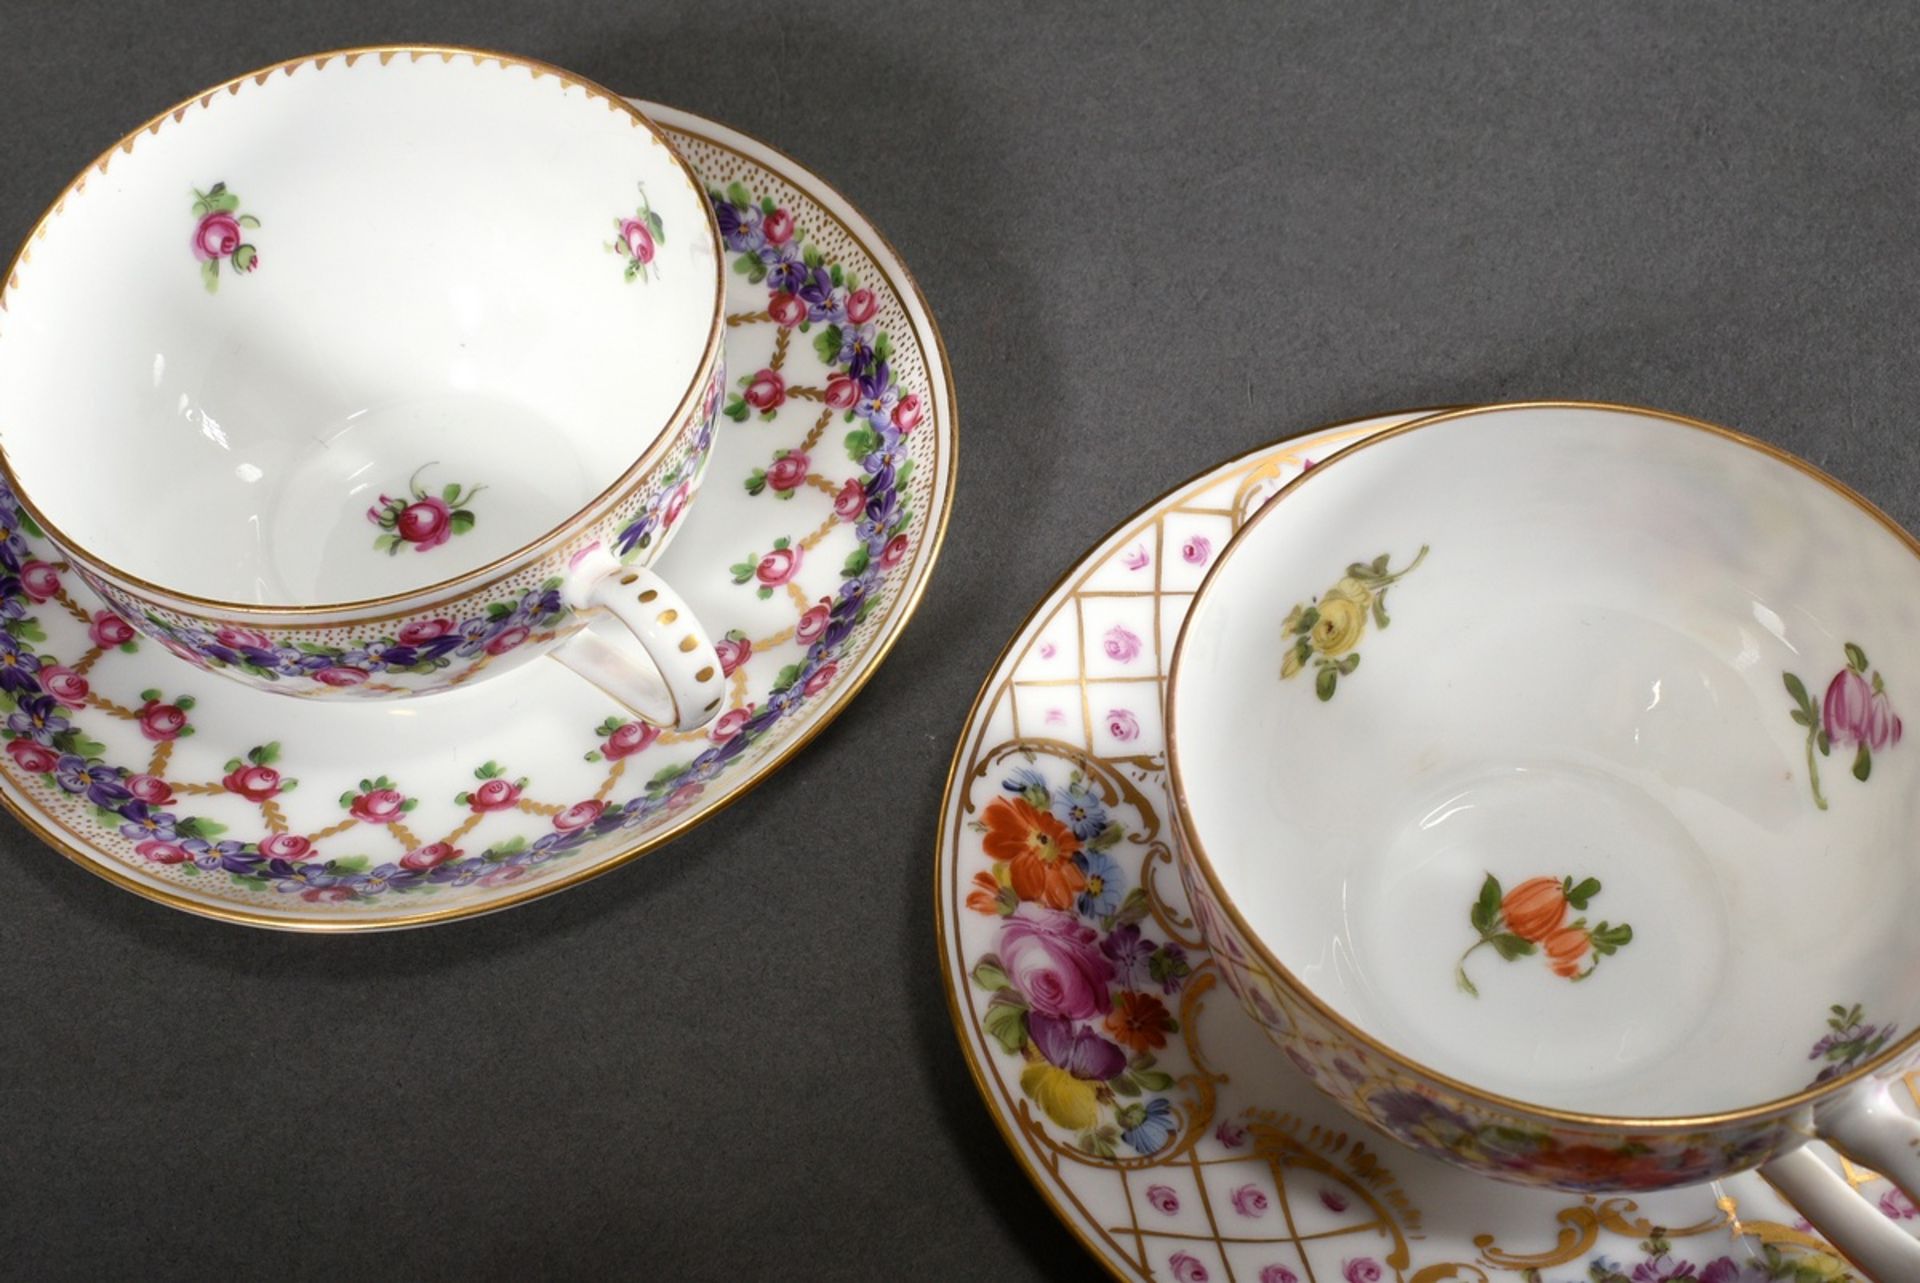 2 Various Dresden tea cups/saucer with polychrome floral painting and gold decoration, Donath & Co. - Image 3 of 4